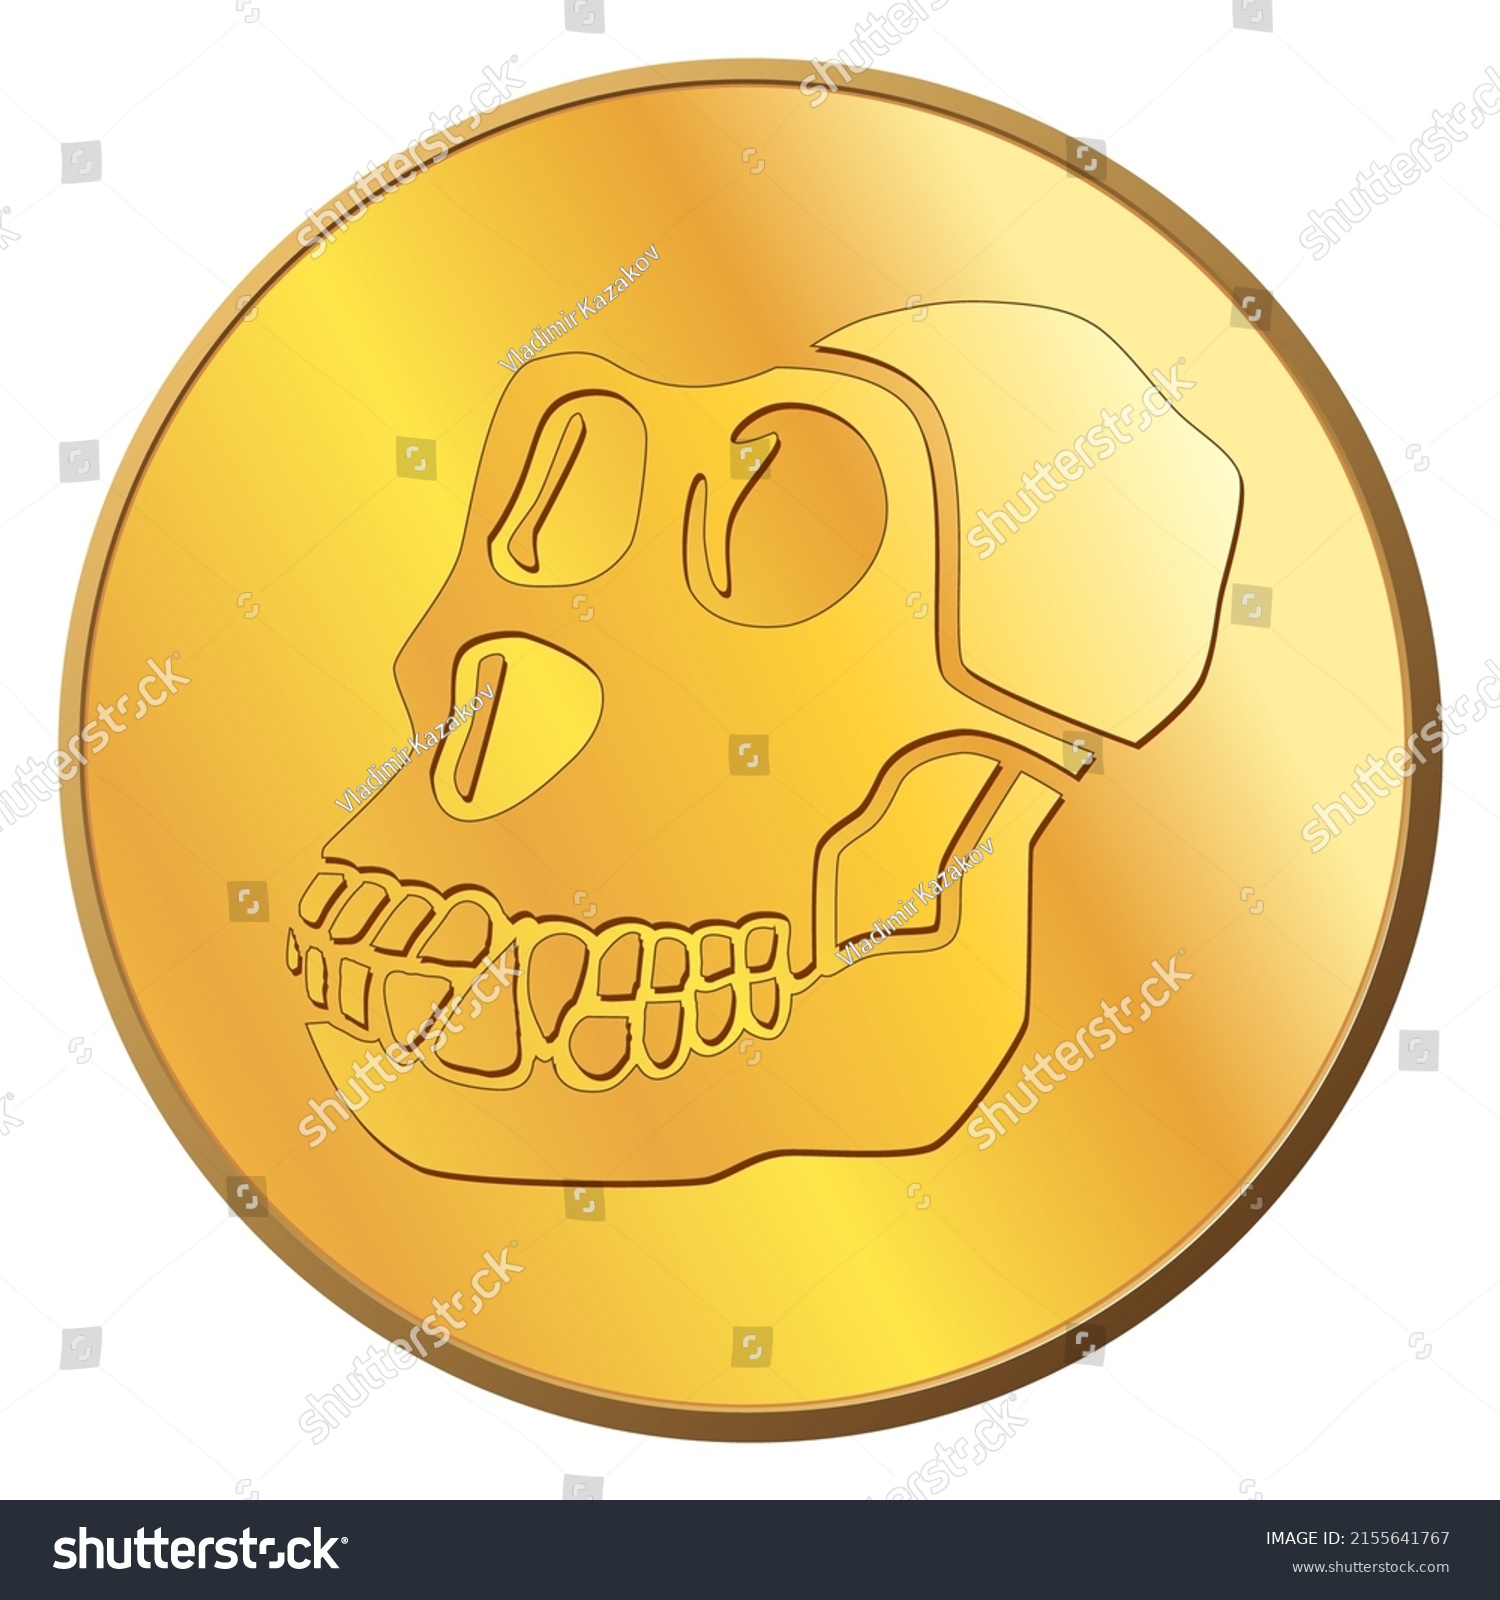 SVG of Golden coin ApeCoin APE in front view isolated on white. Cryptocurrency logo icon on coin. Tokens allocated for BAYC and MAYC NFT holders for for WEB3 economy. Vector illustration. svg